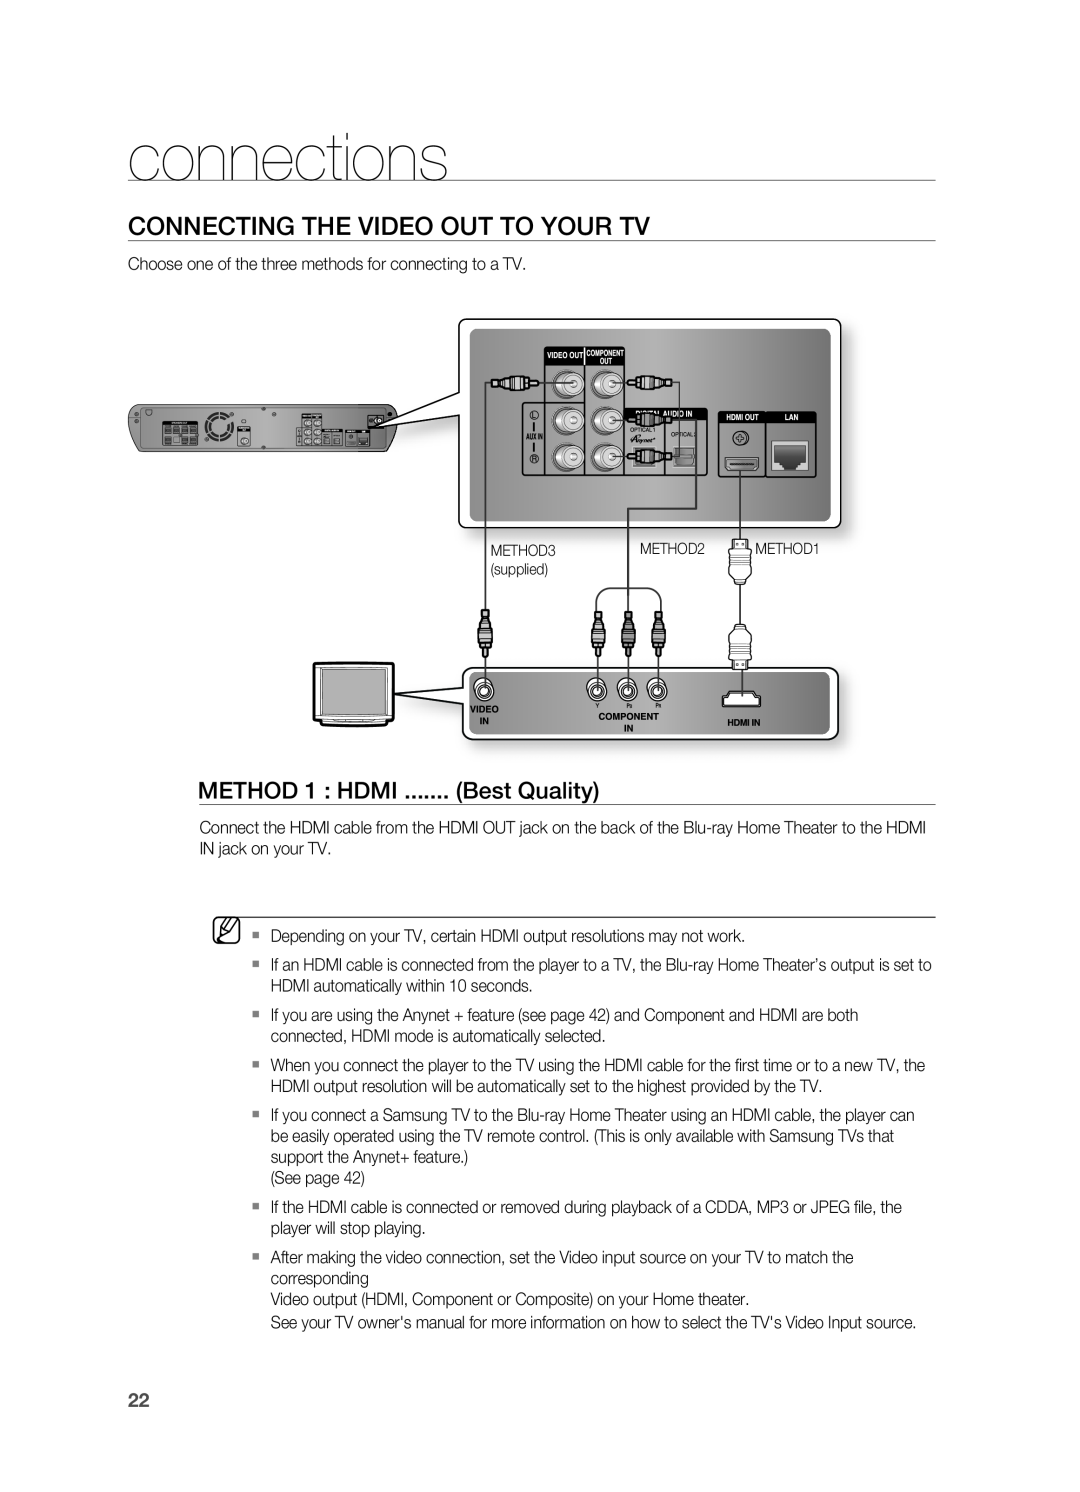 Samsung HT-BD2 manual Connecting the Video Out to your TV, METHOD 1 : HDMI, Best Quality, connections 